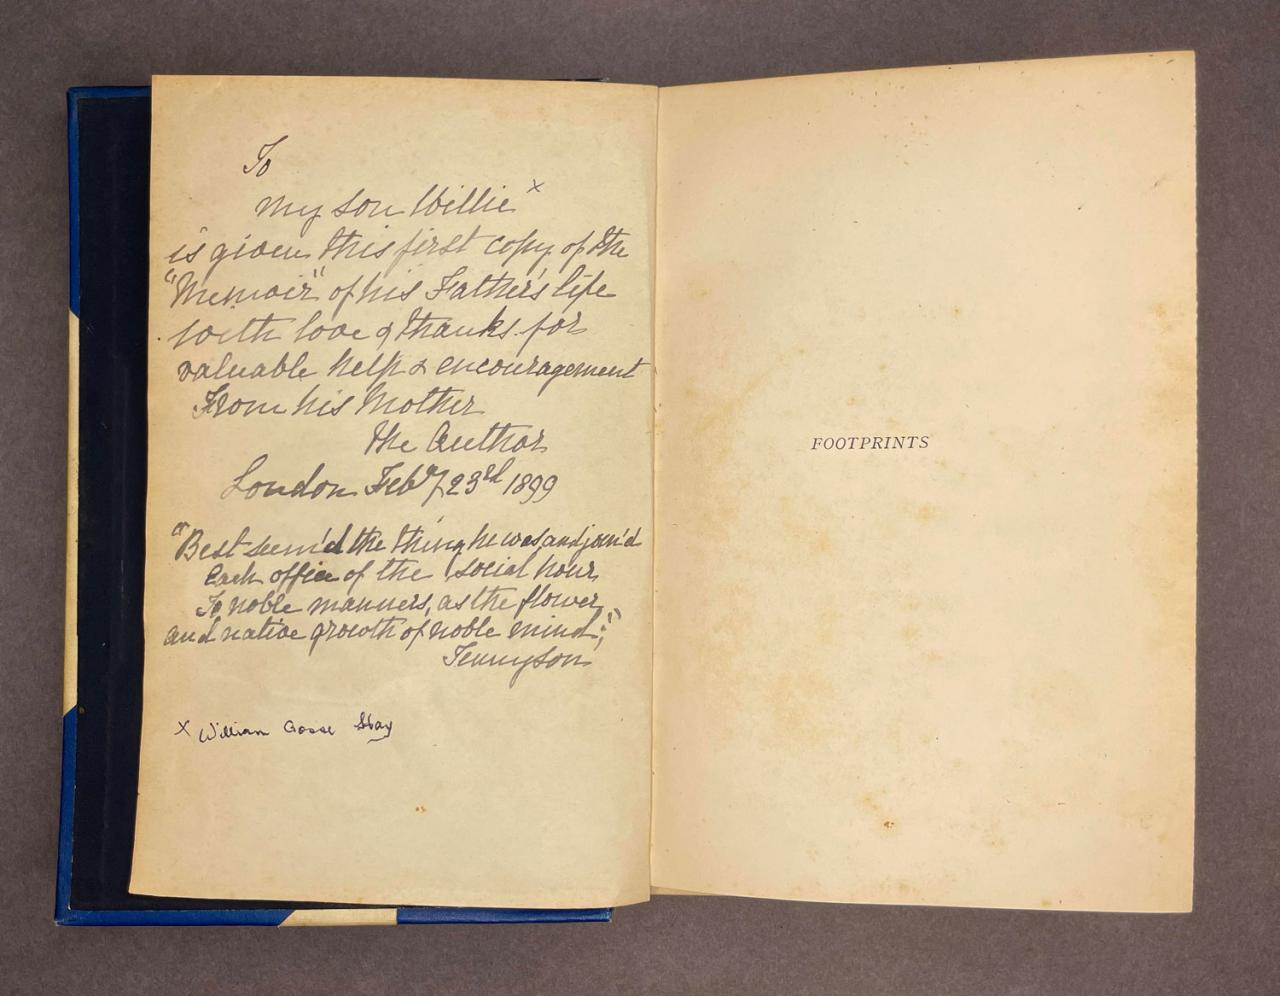 Inscription to Mr William Hall in one of the Footprints book